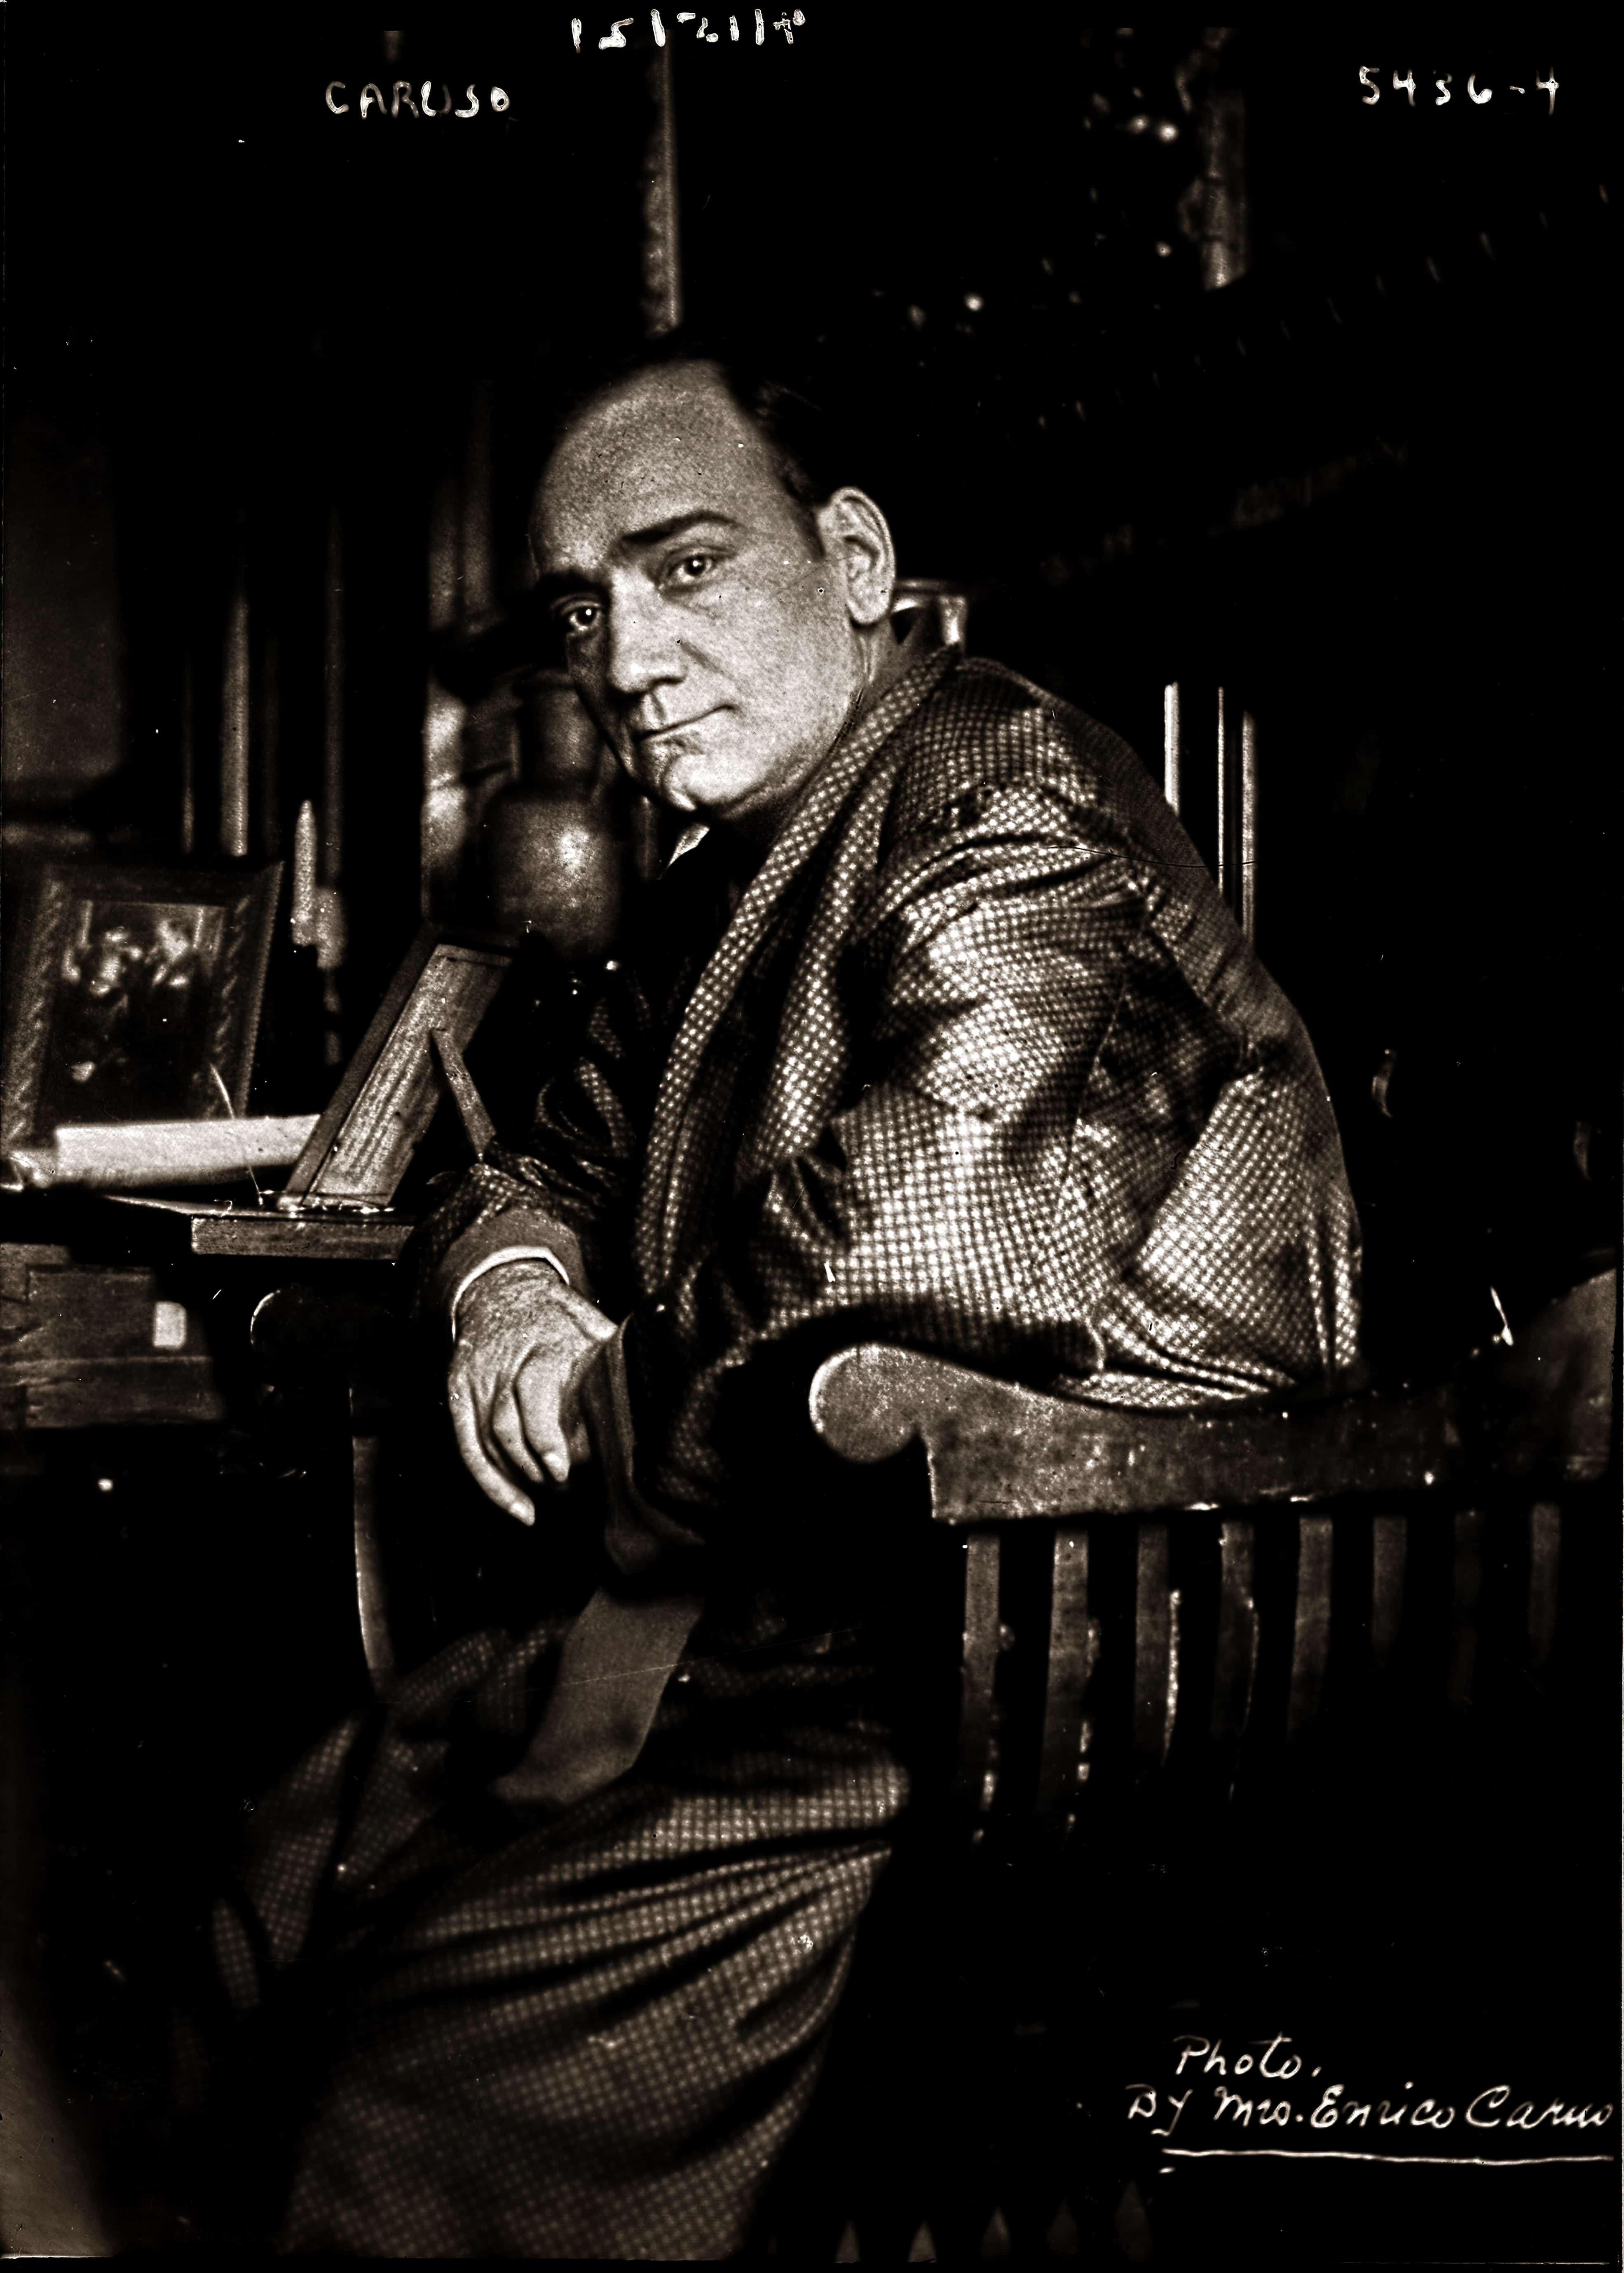 100 years after Caruso…